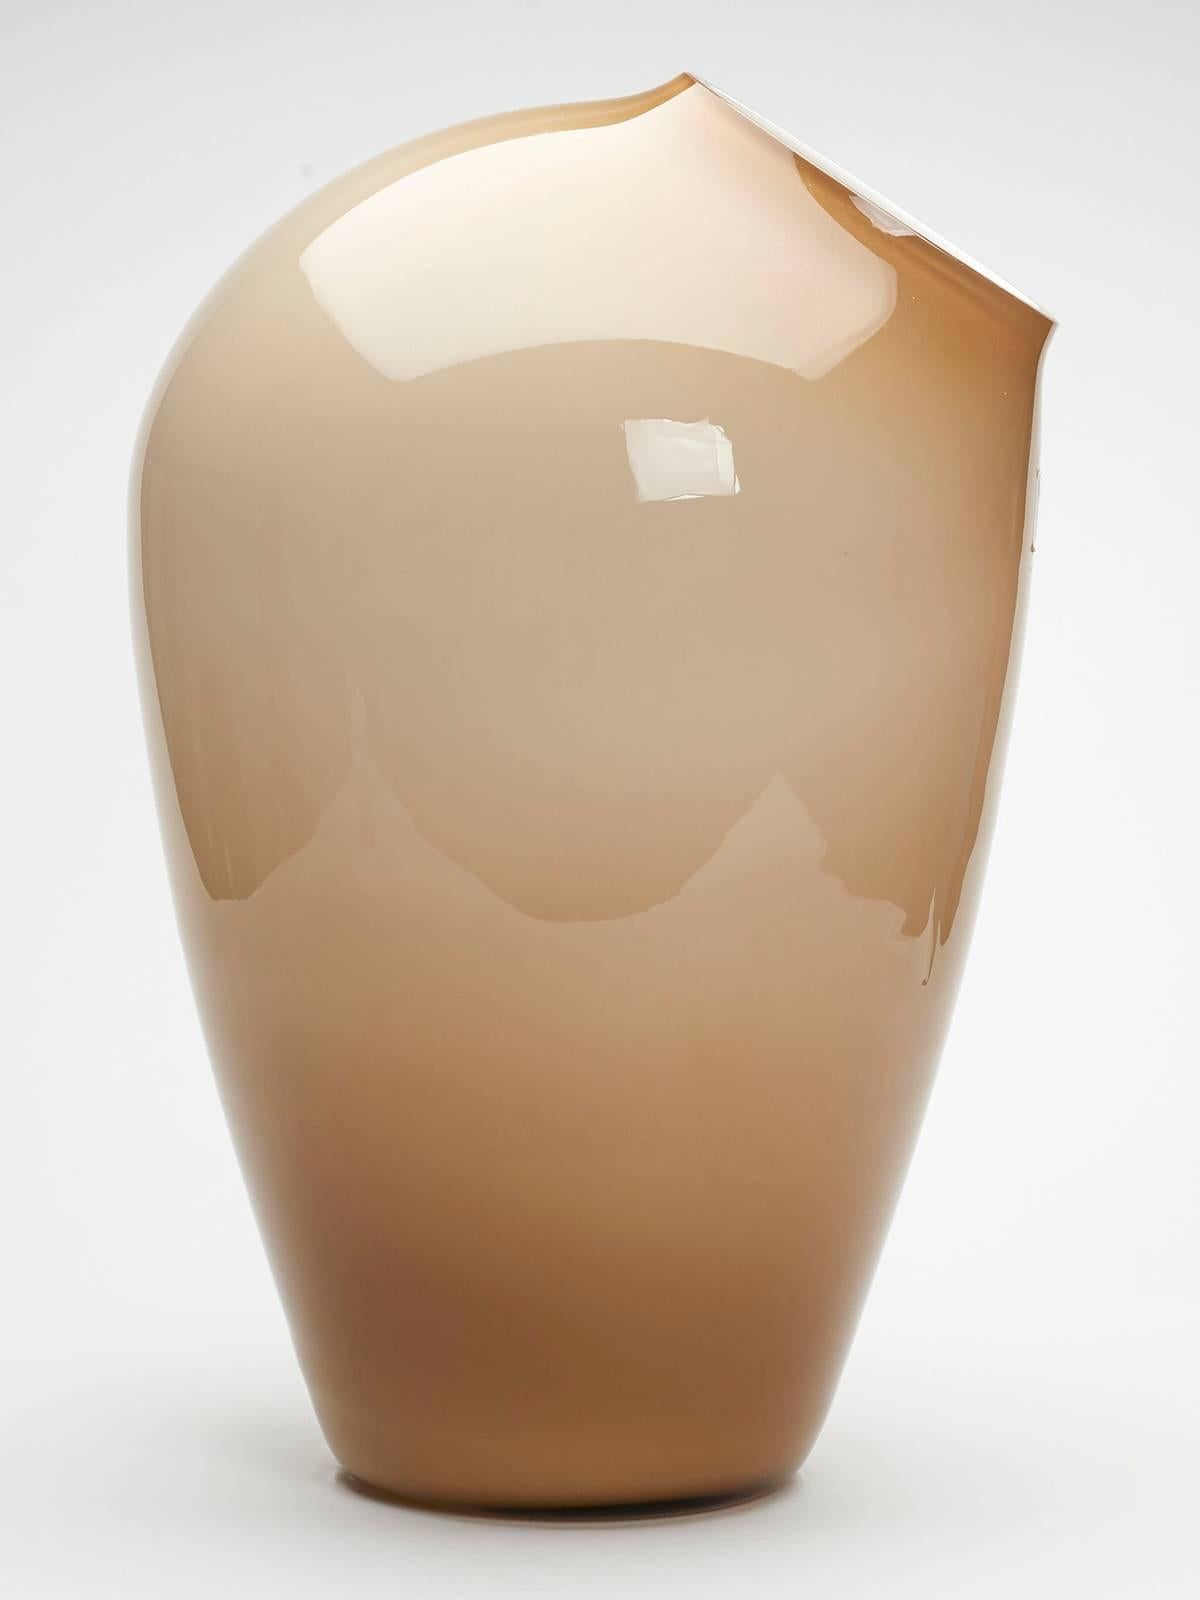 A large and stunning vintage German Schott Zweisel overlay glass vase with angled side cut opening with clear cased brown over white glass lining. The handblown vase has an original part paper label attached with acid etched makers marks to the base.